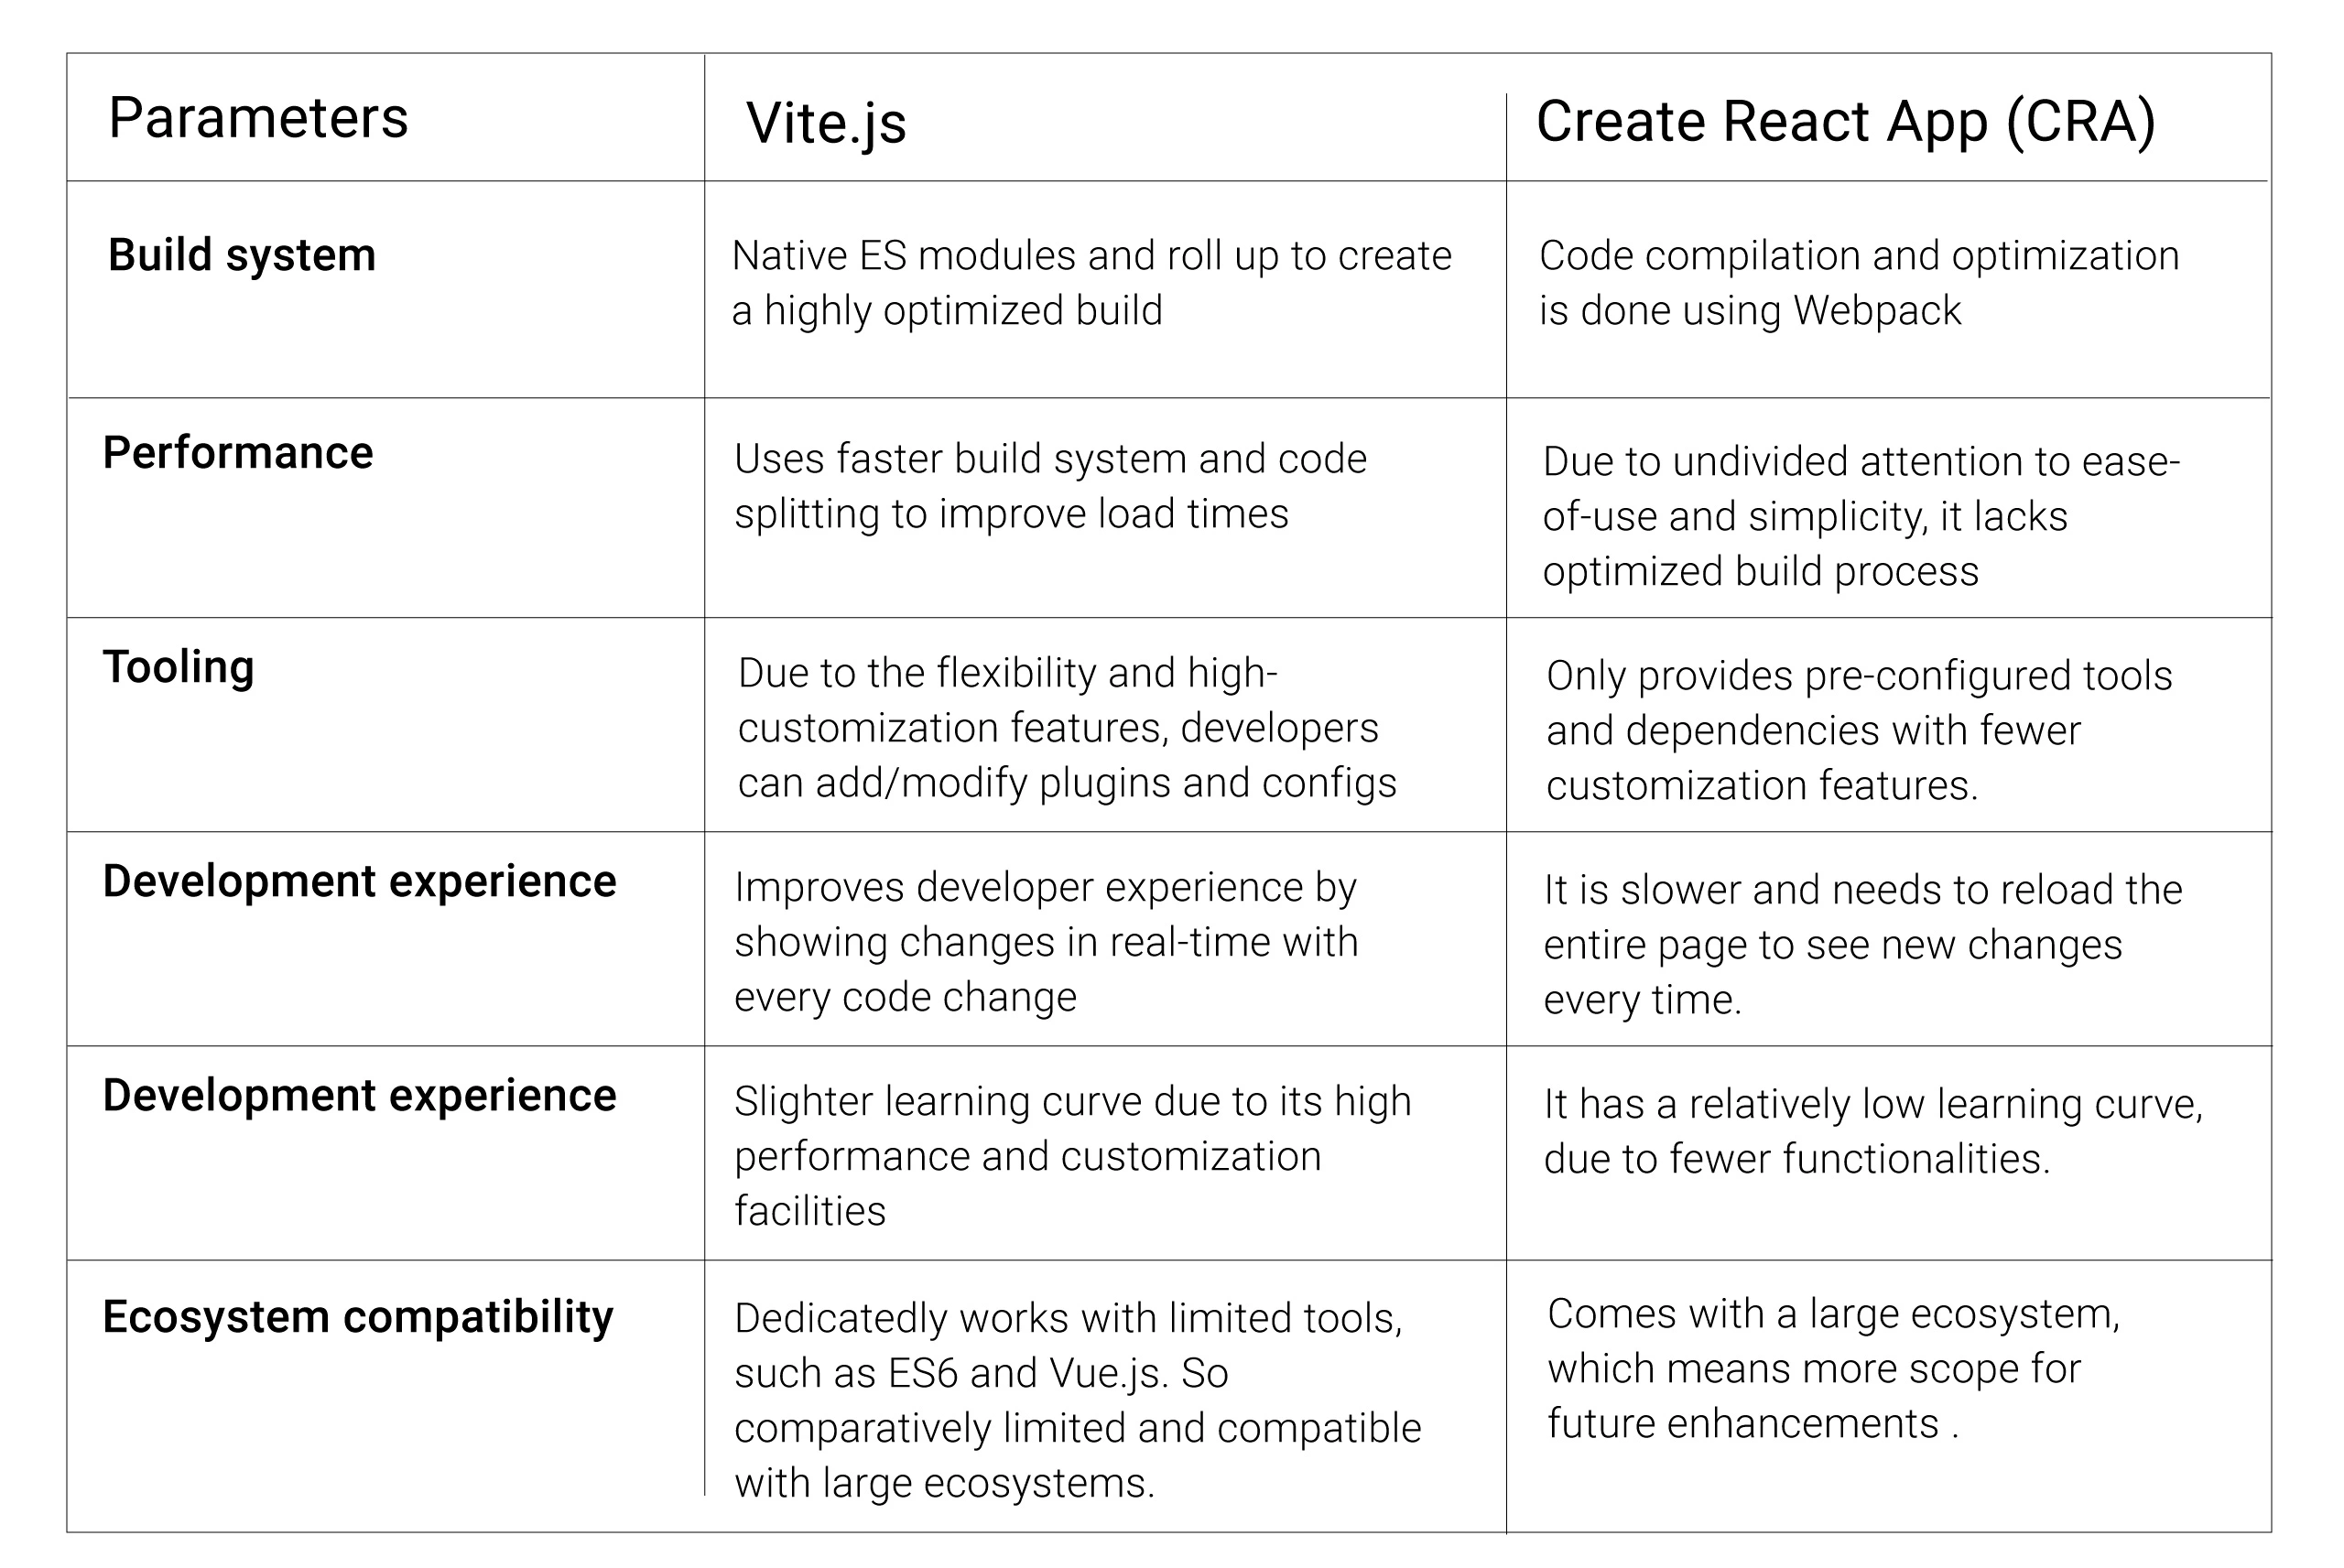 Vite.js vs. Create React App difference table